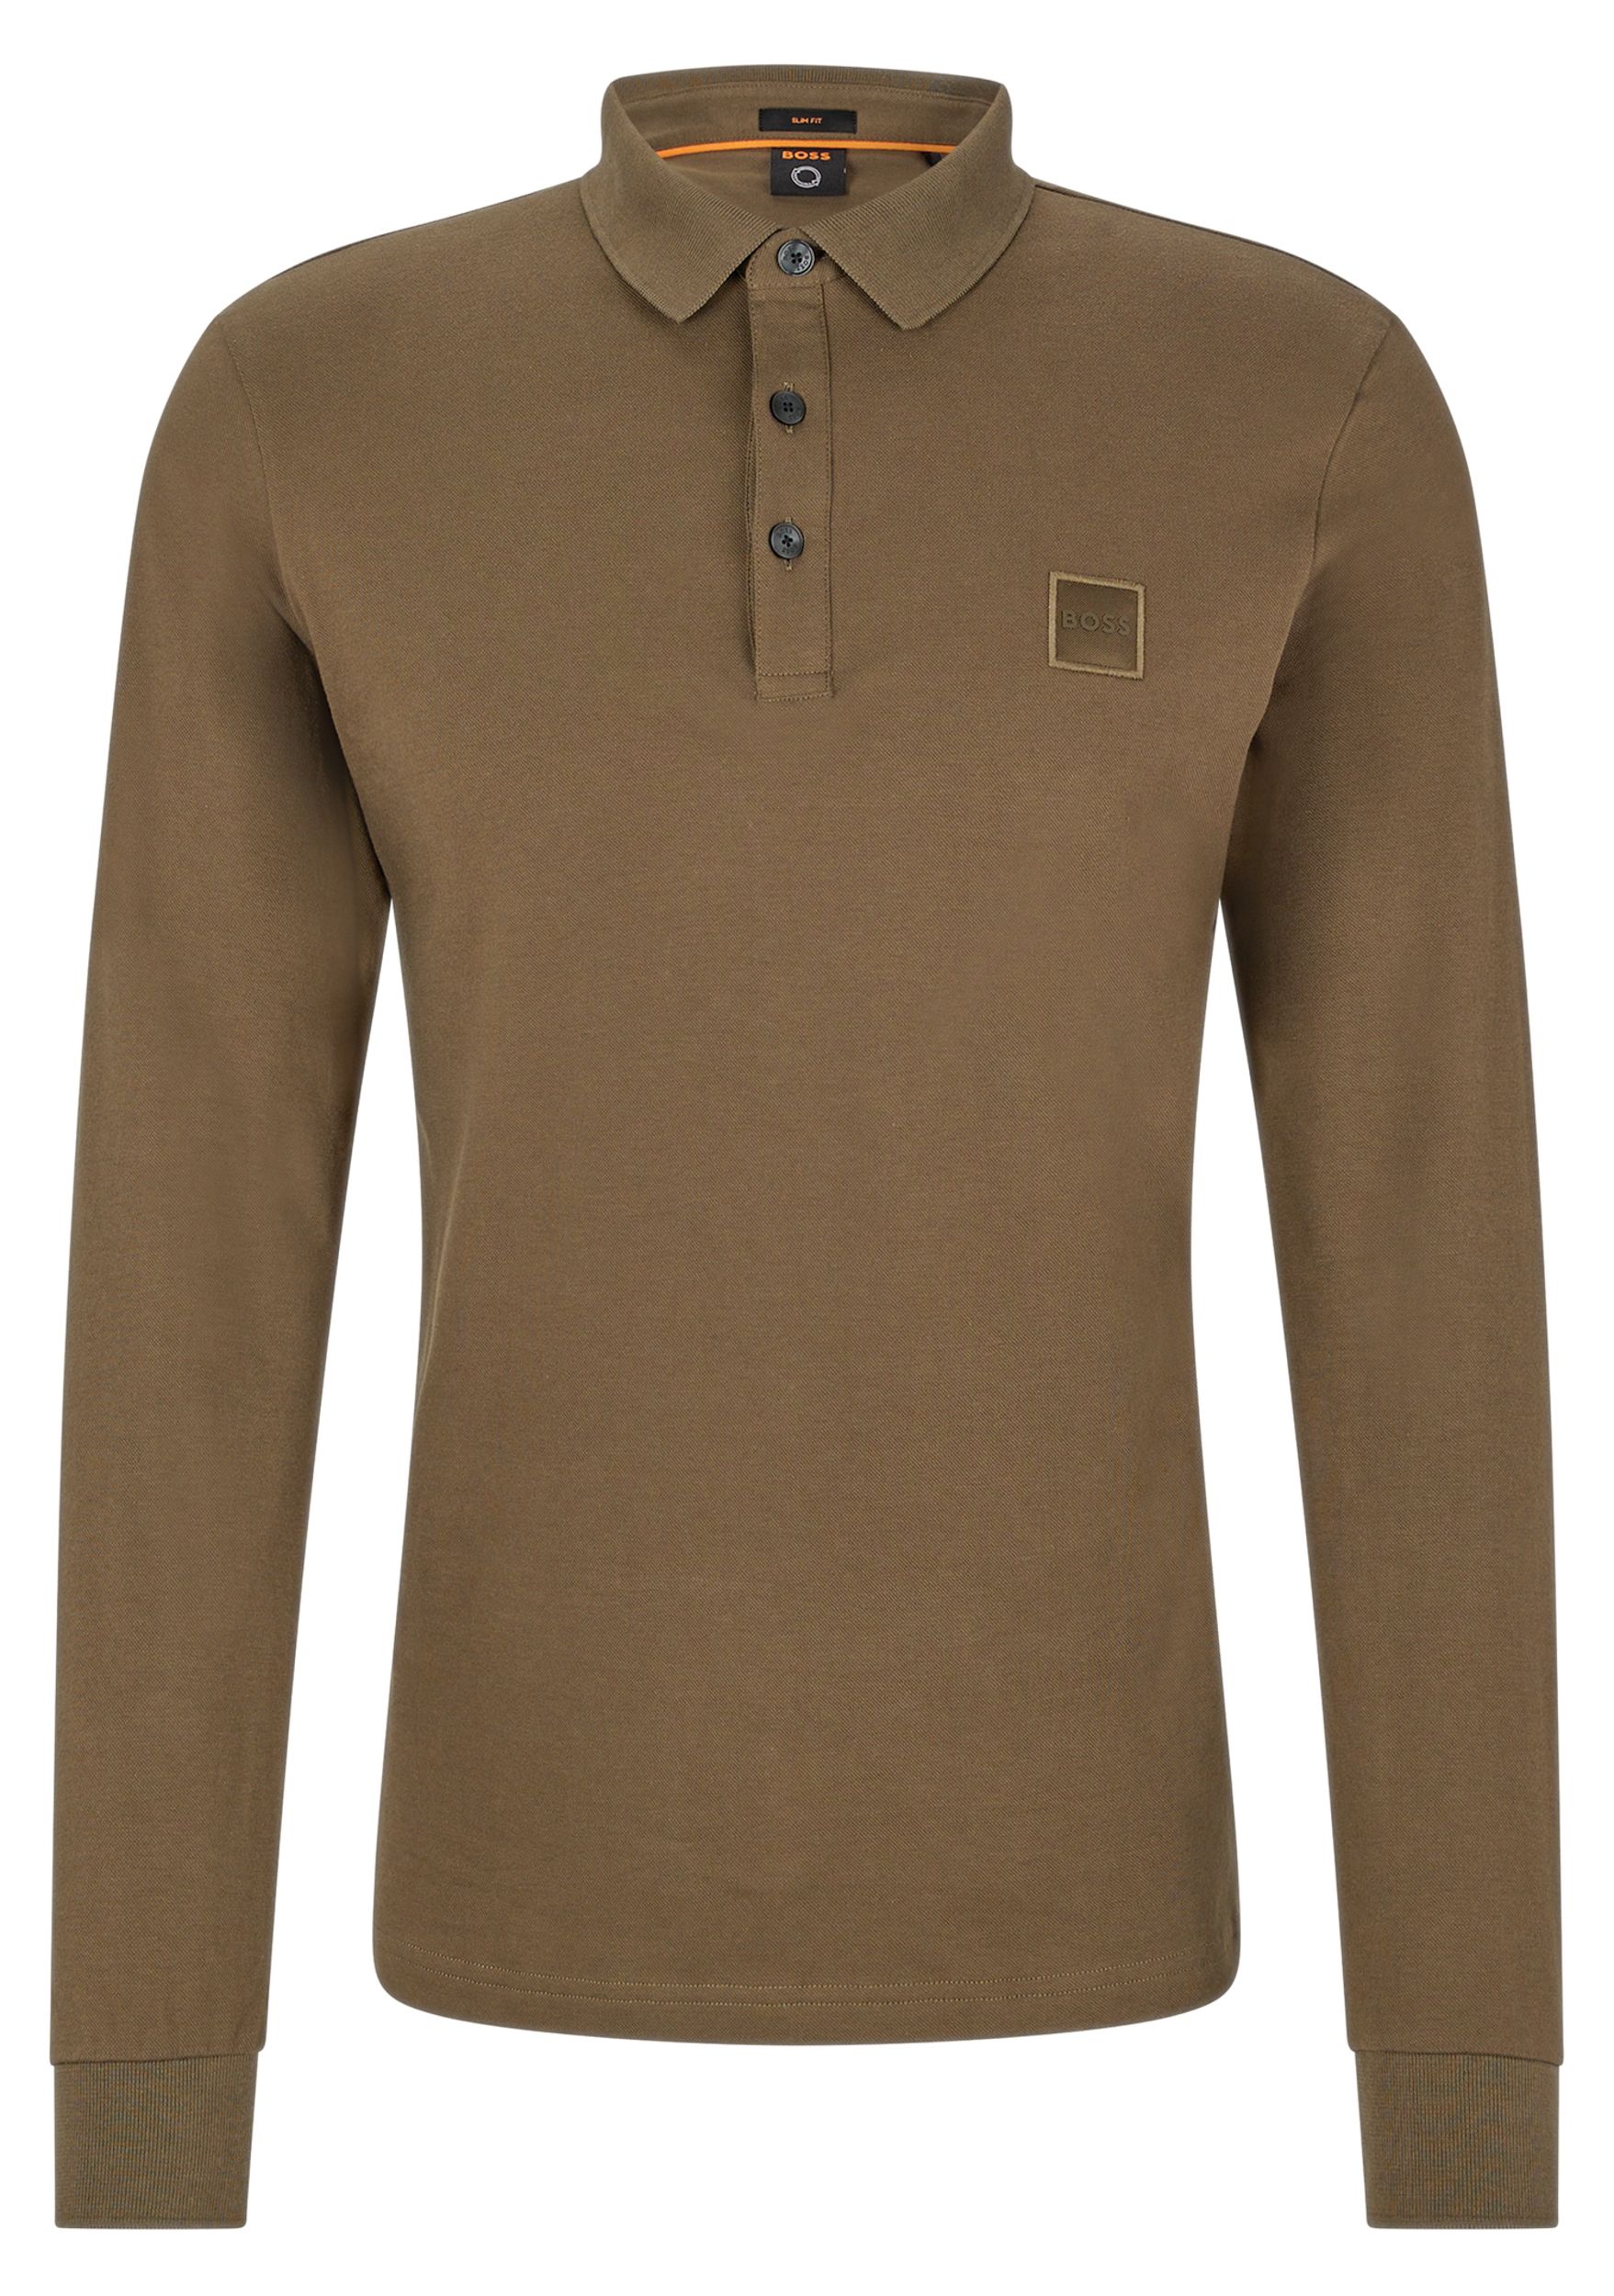 Hugo Boss Casual Passerby Polo LM Donker groen 074036-001-L